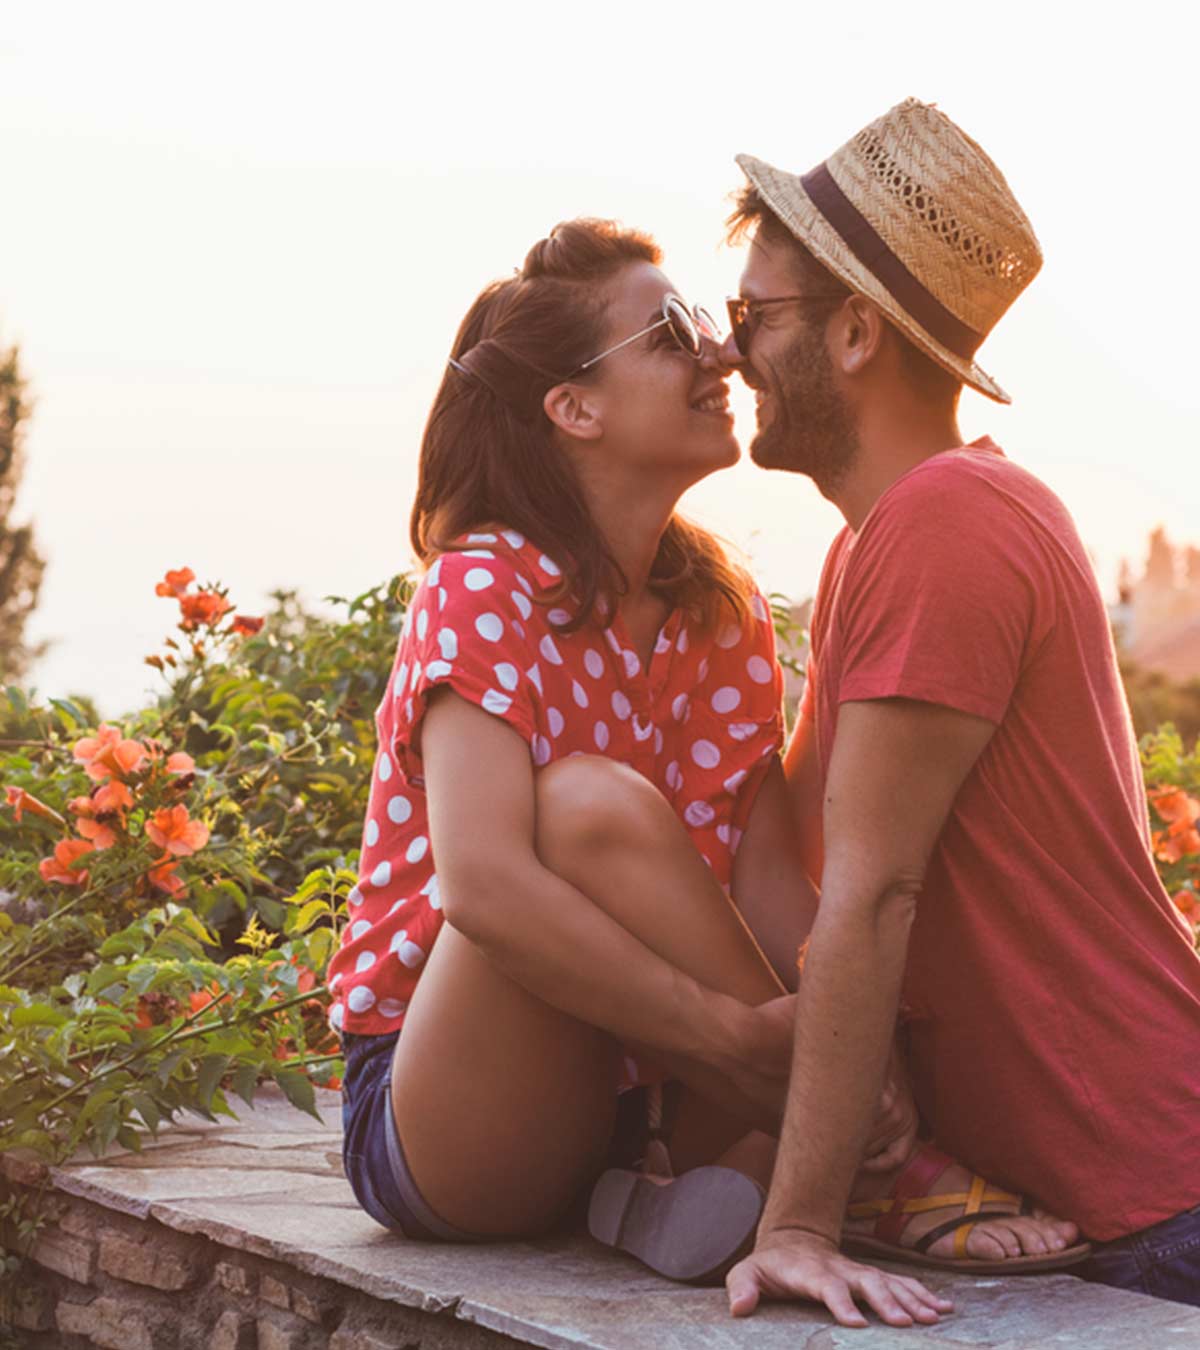 8 Gross Things Your Body Does When You’re In Love